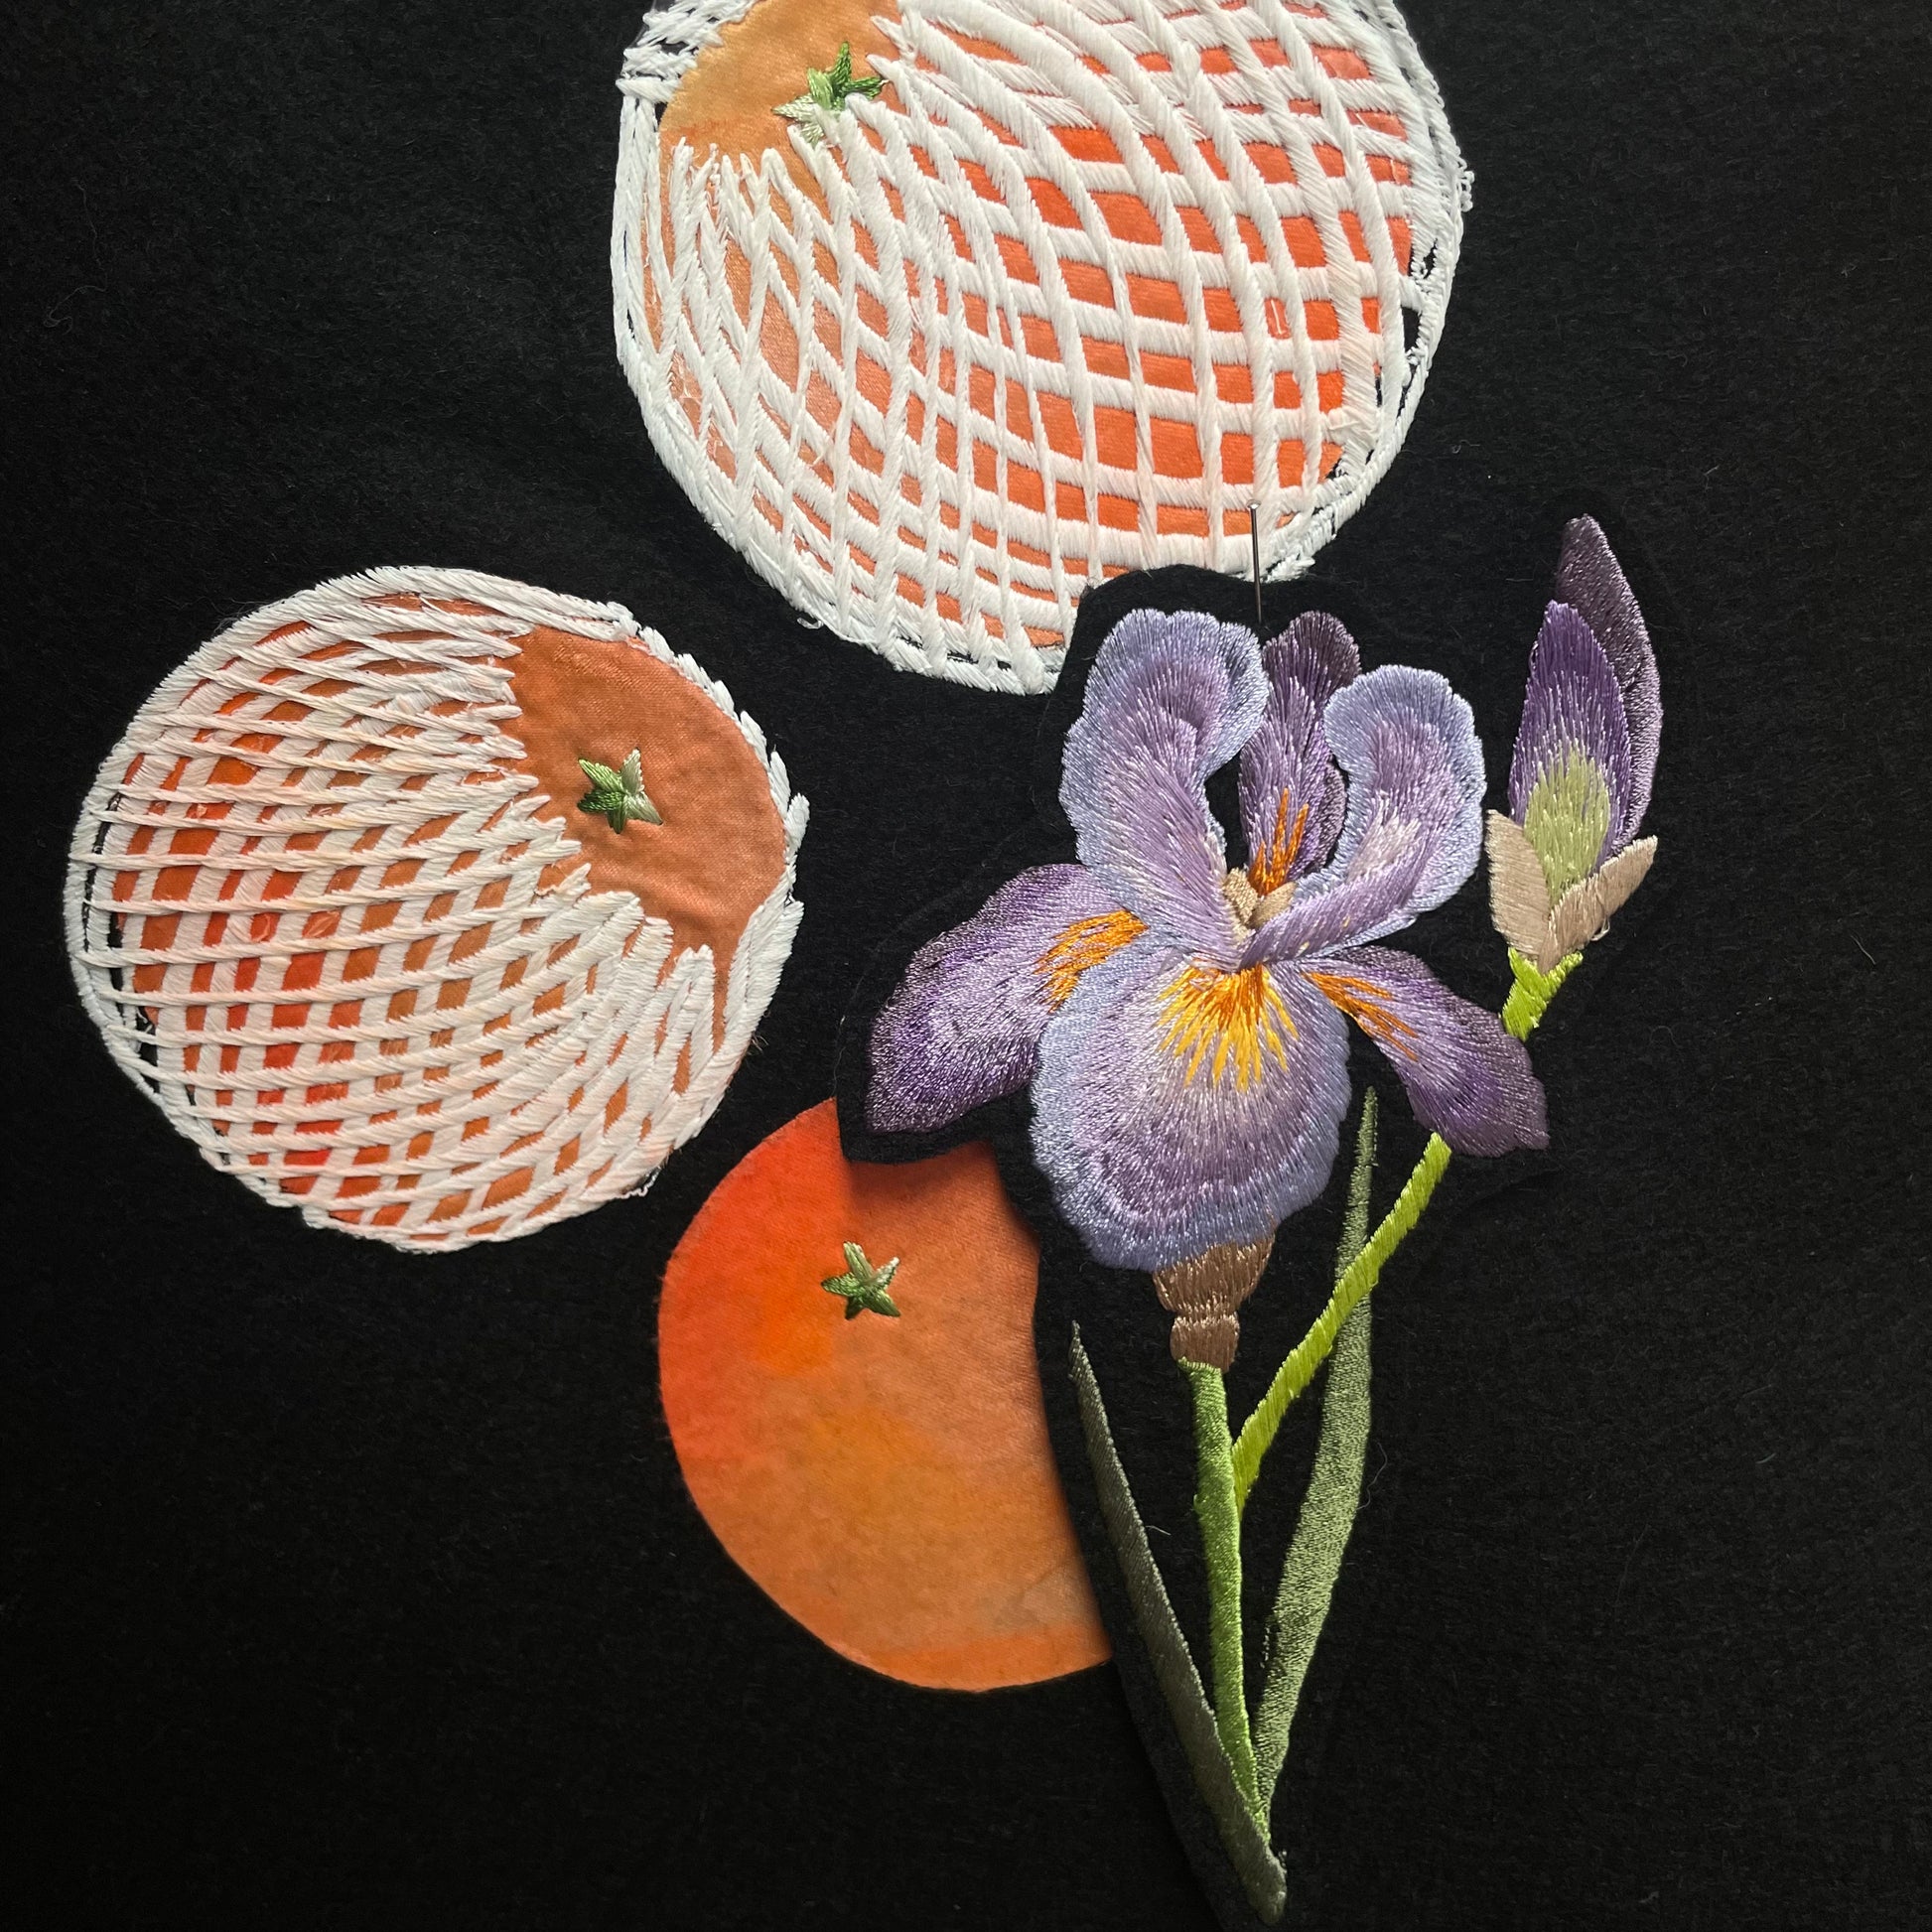 Iris embroidered patch pinned to black felt that has embroidered oranges on